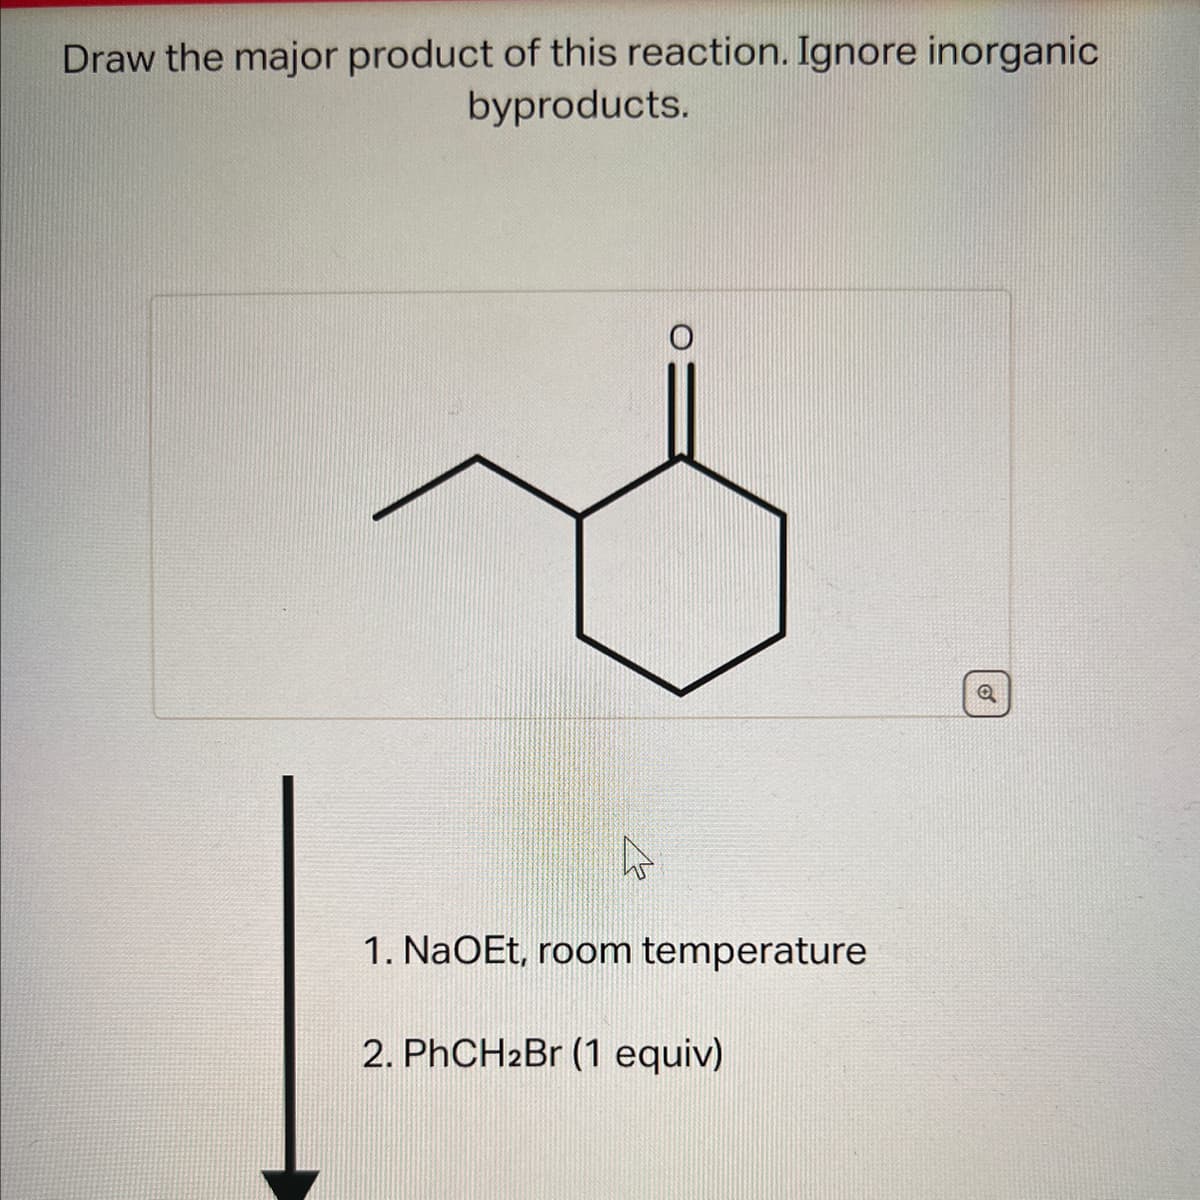 Draw the major product of this reaction. Ignore inorganic
byproducts.
A
1. NaOEt, room temperature
2. PhCH₂Br (1 equiv)